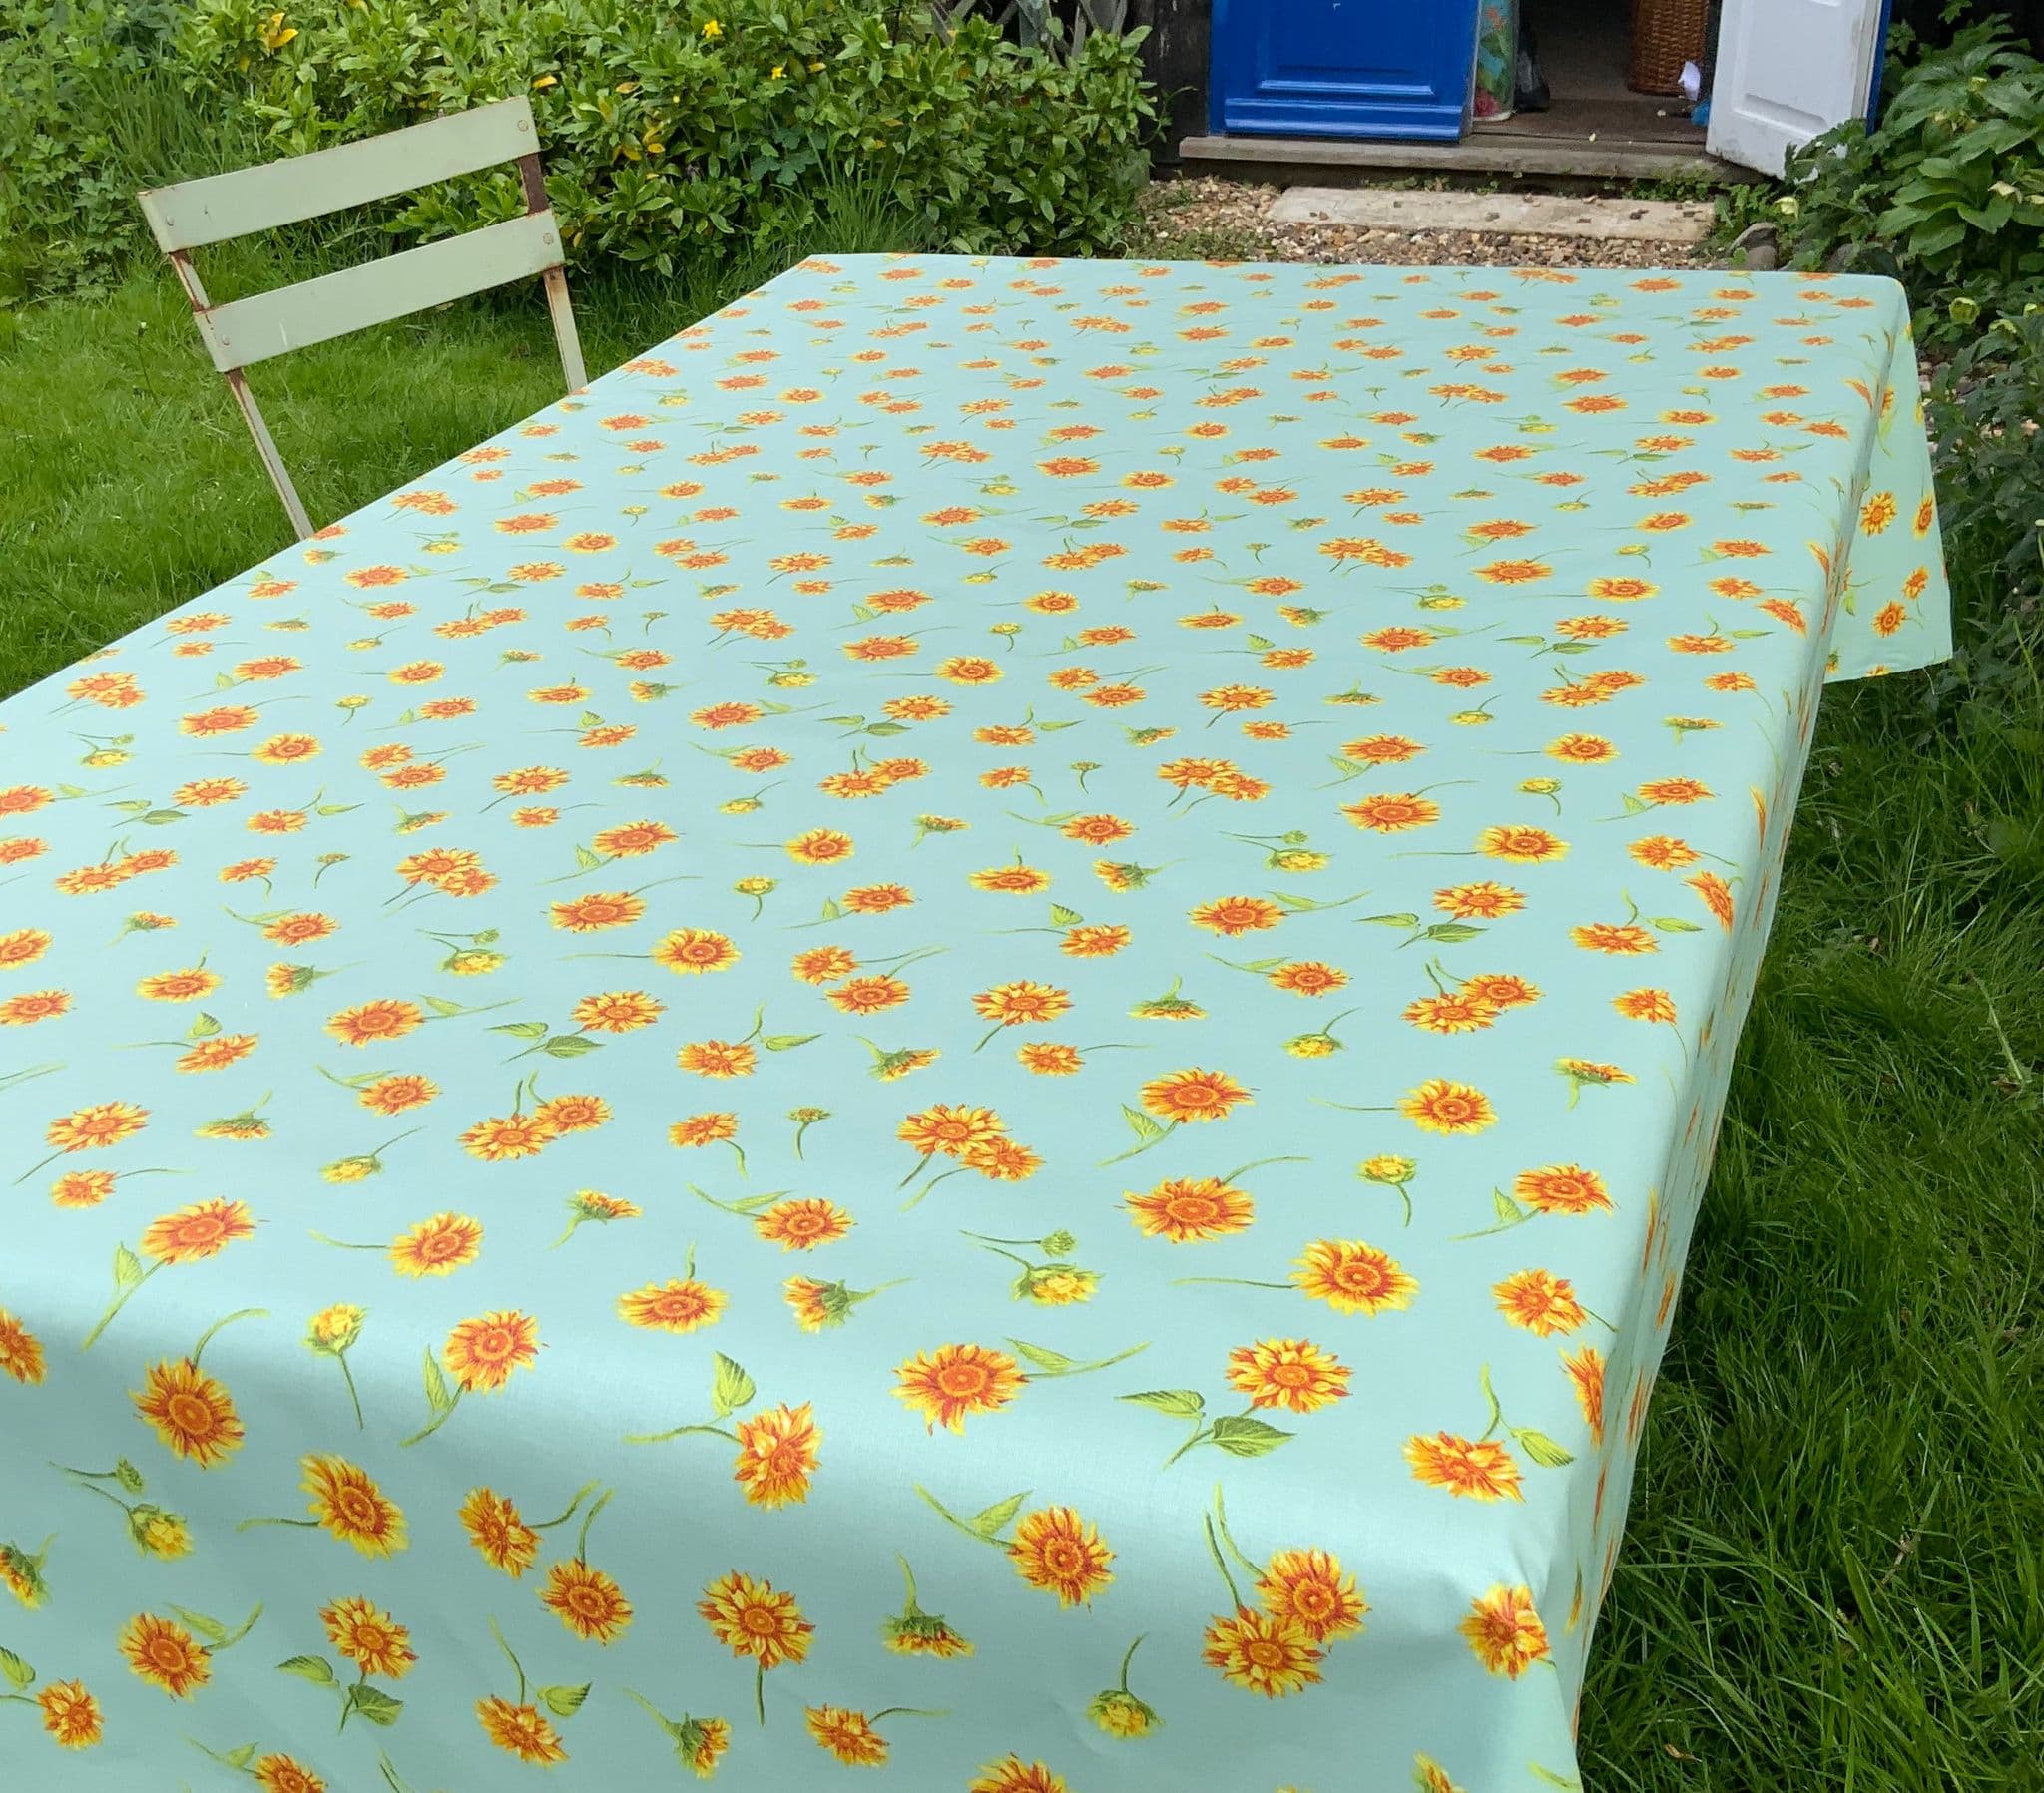 Sunflowers Extra Wide Acrylic Oilcloth